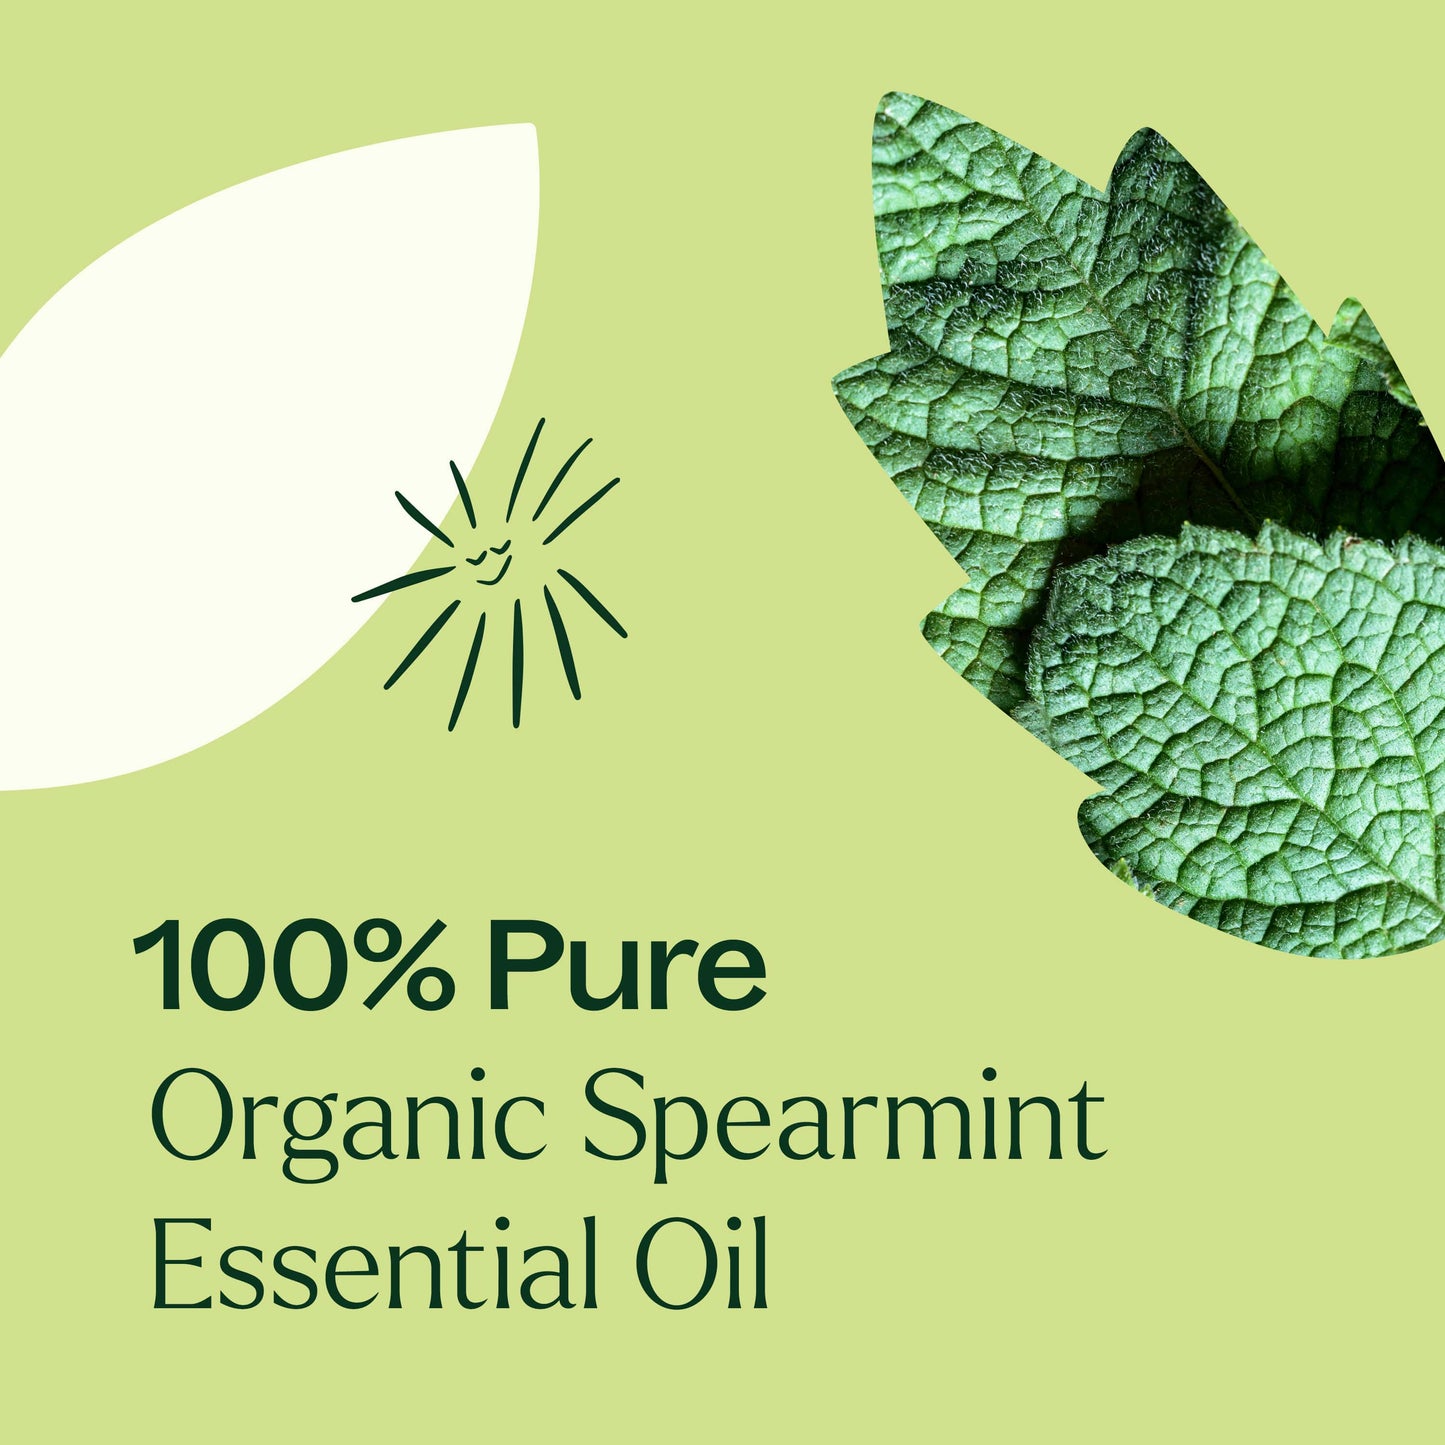 Organic Spearmint Essential Oil is 100% pure